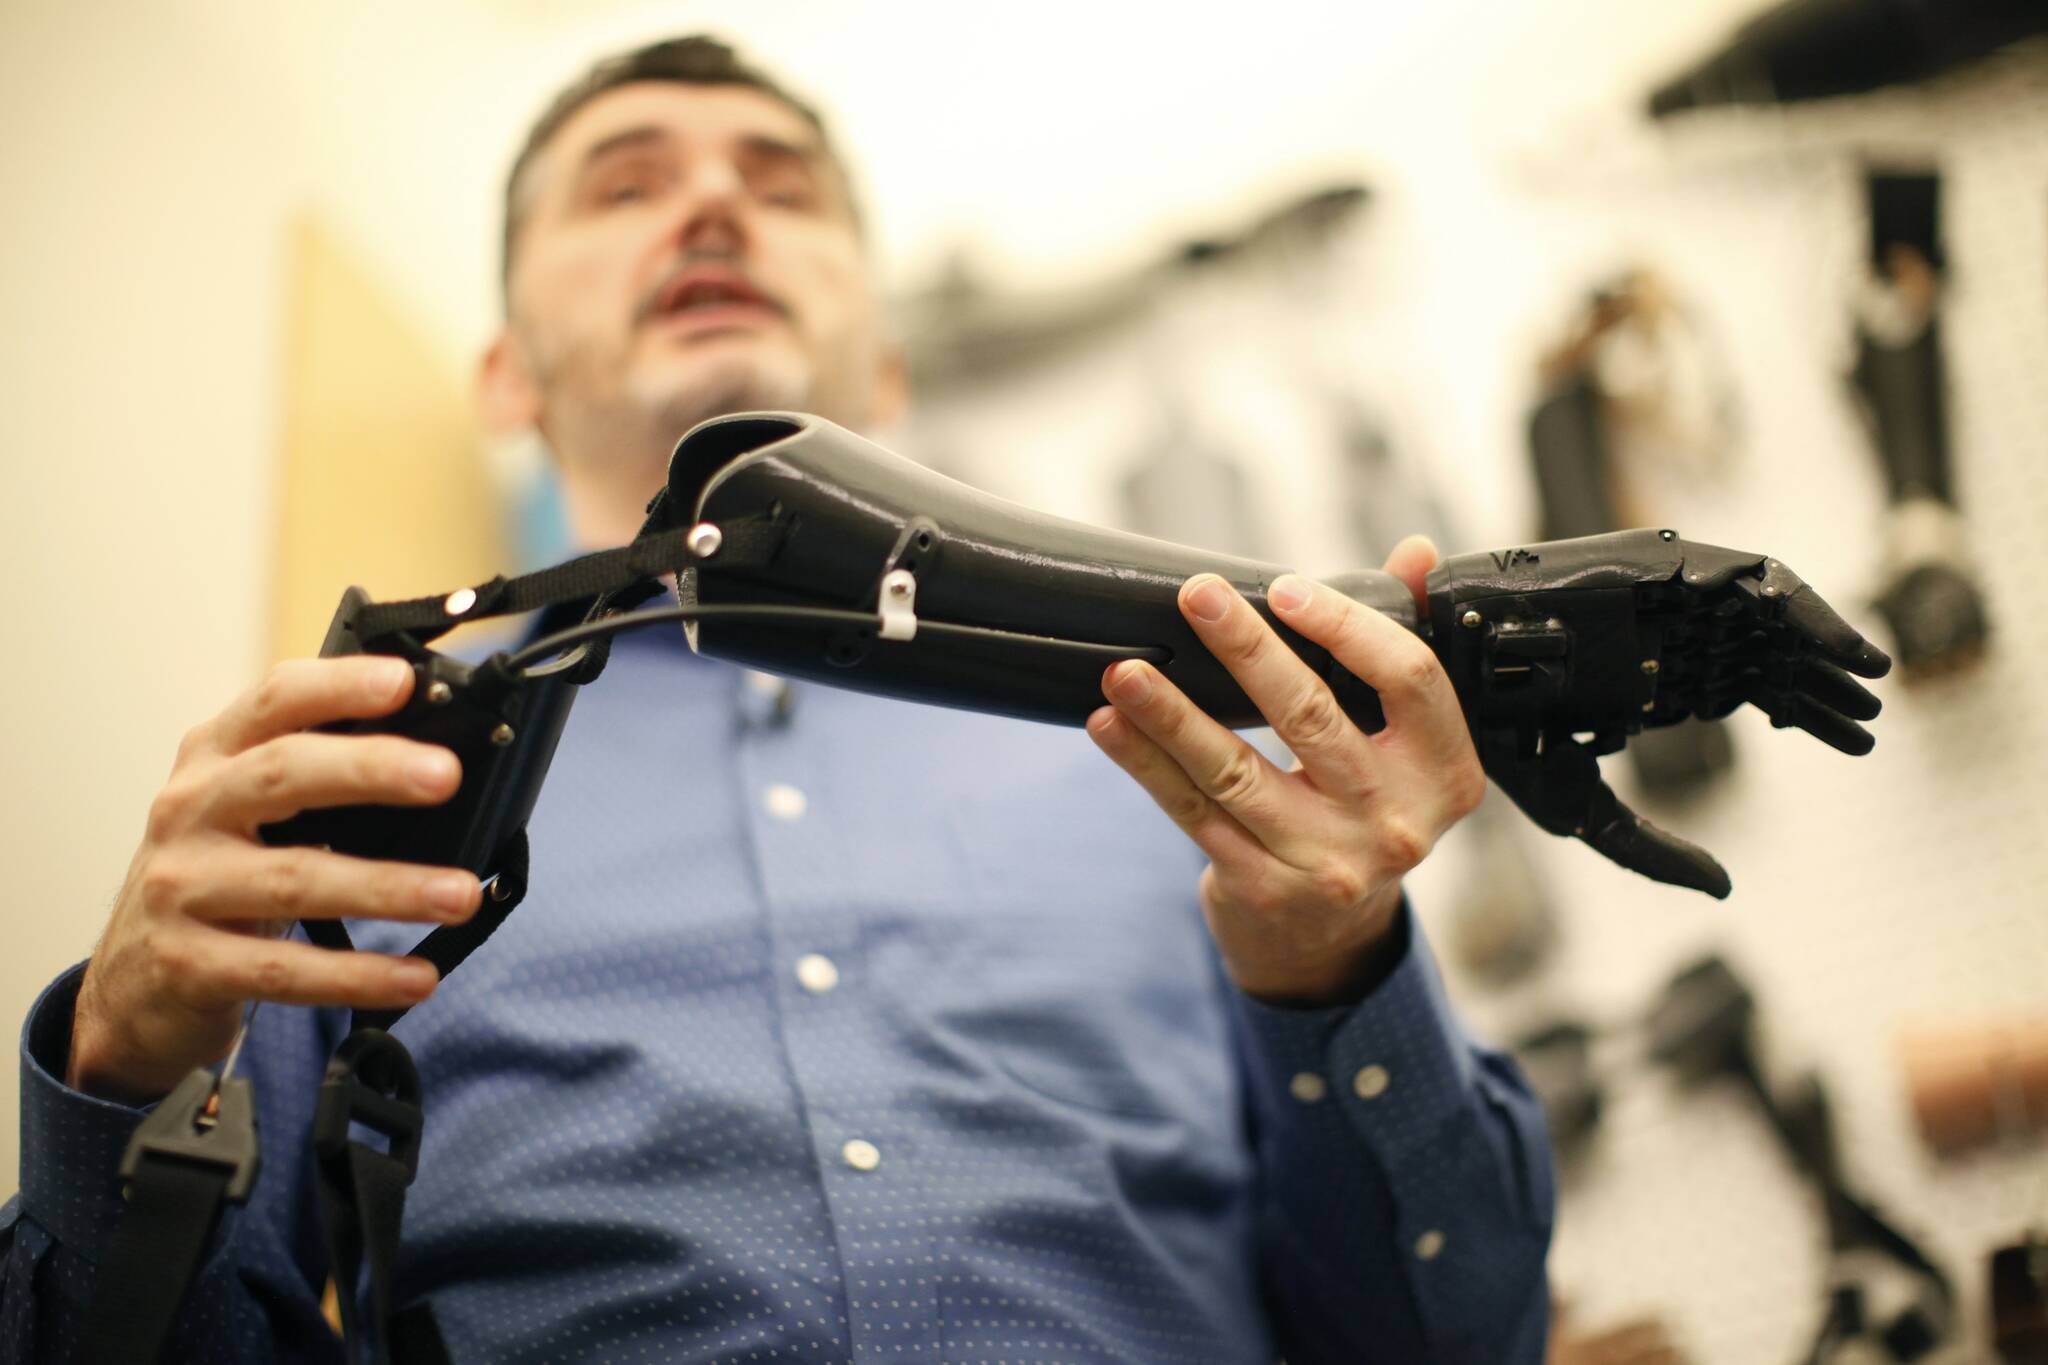 Mechanical engineering professor Nick Dechev talks about a prosthetic limb made from using a 3D-printer and polylactic acid for amputees and kids in Canada and the US part of the Victoria Hand Project in the engineering lab wing at the University of Victoria in Victoria, B.C., on Tuesday, December 3, 2019. THE CANADIAN PRESS/Chad Hipolito